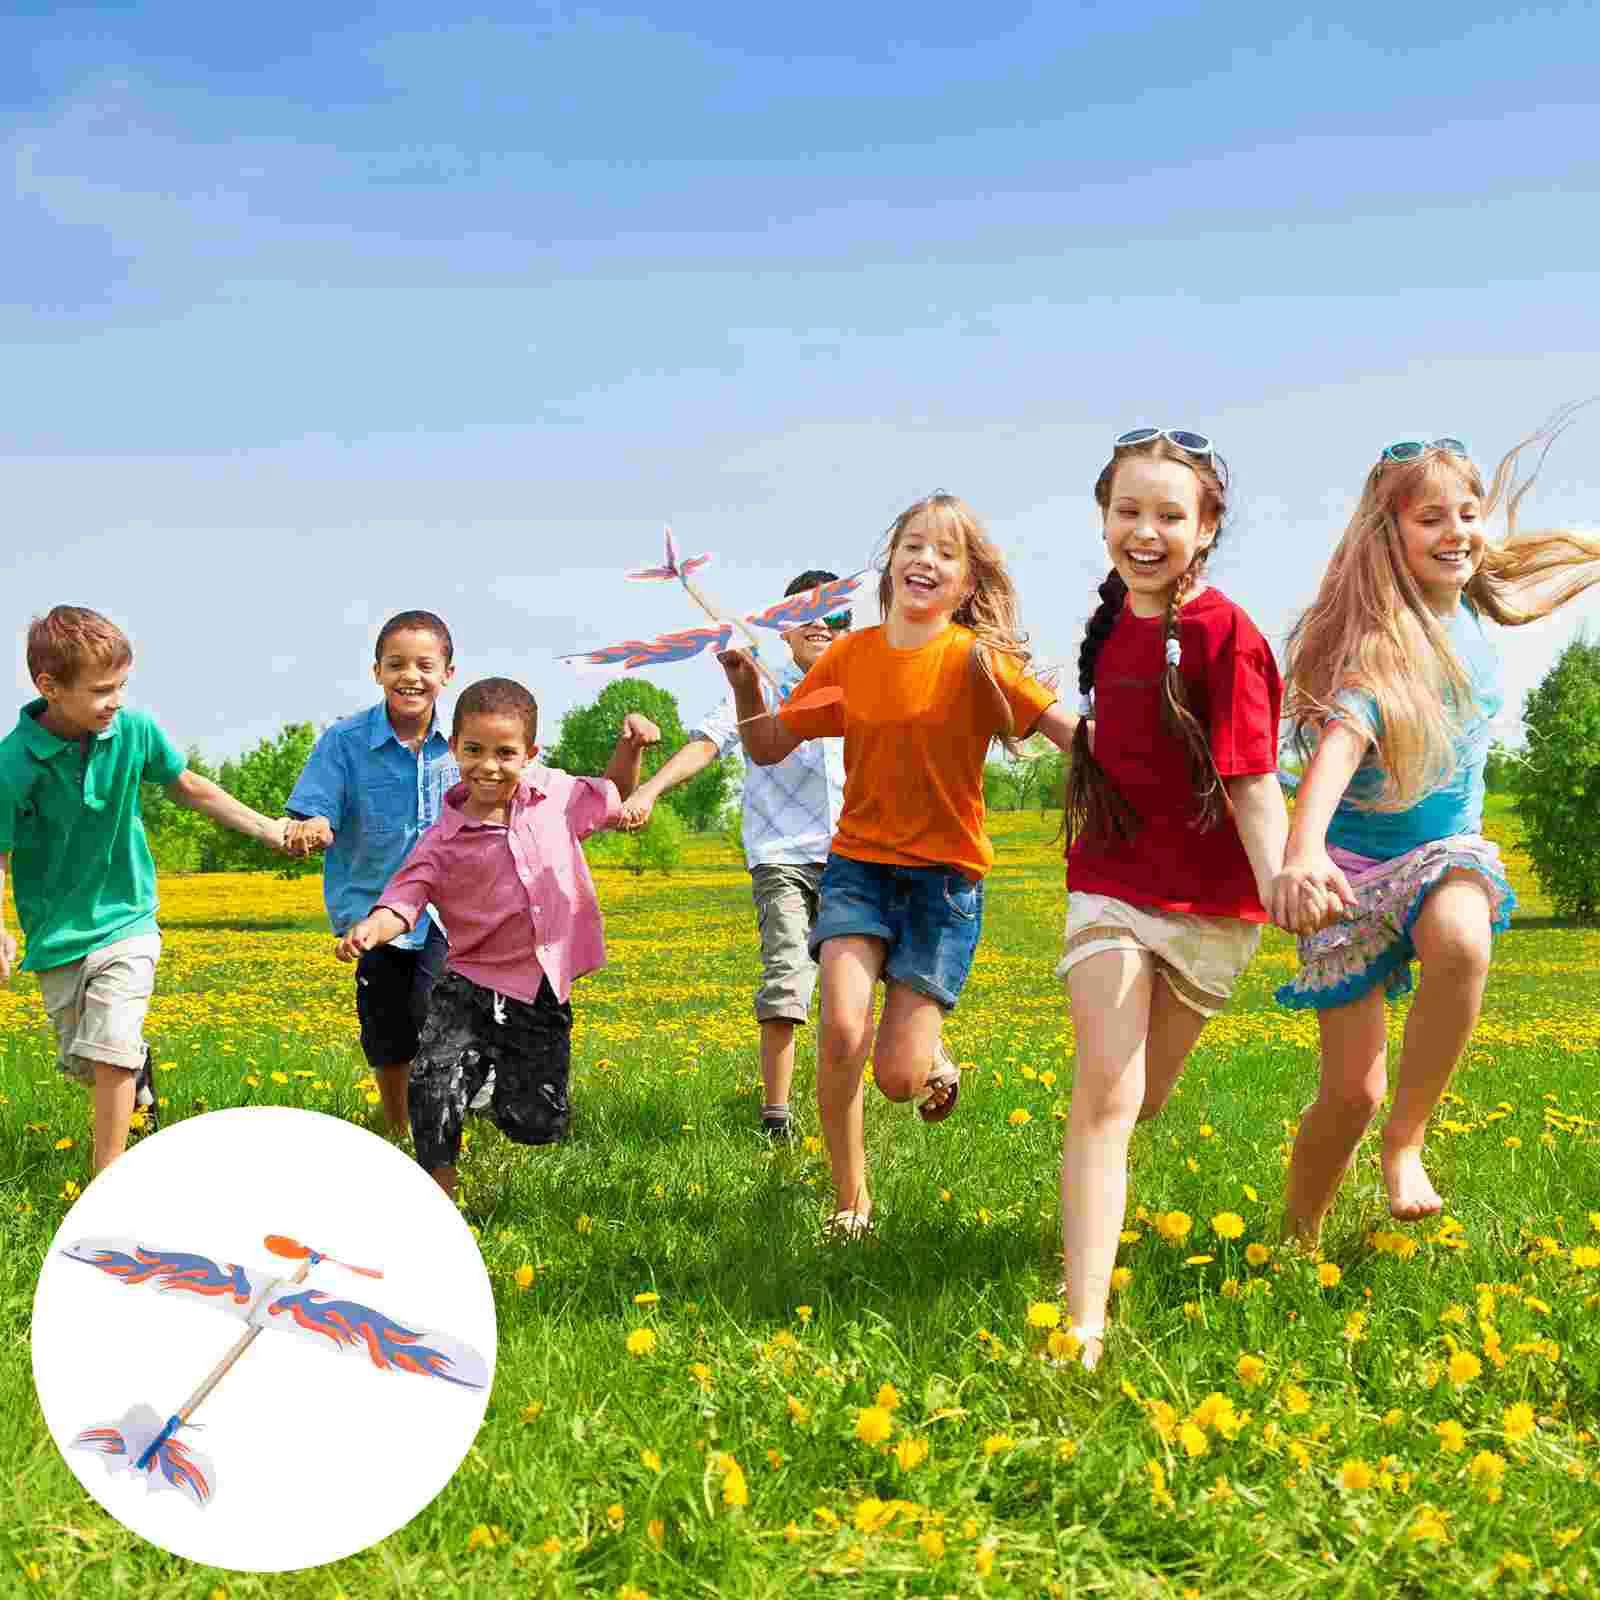 

3pcs Glider Airplane Toys Aircraft Slingshot Planes Hand Throwing Planes Flying Aeroplane Model Helicopter Educational Random